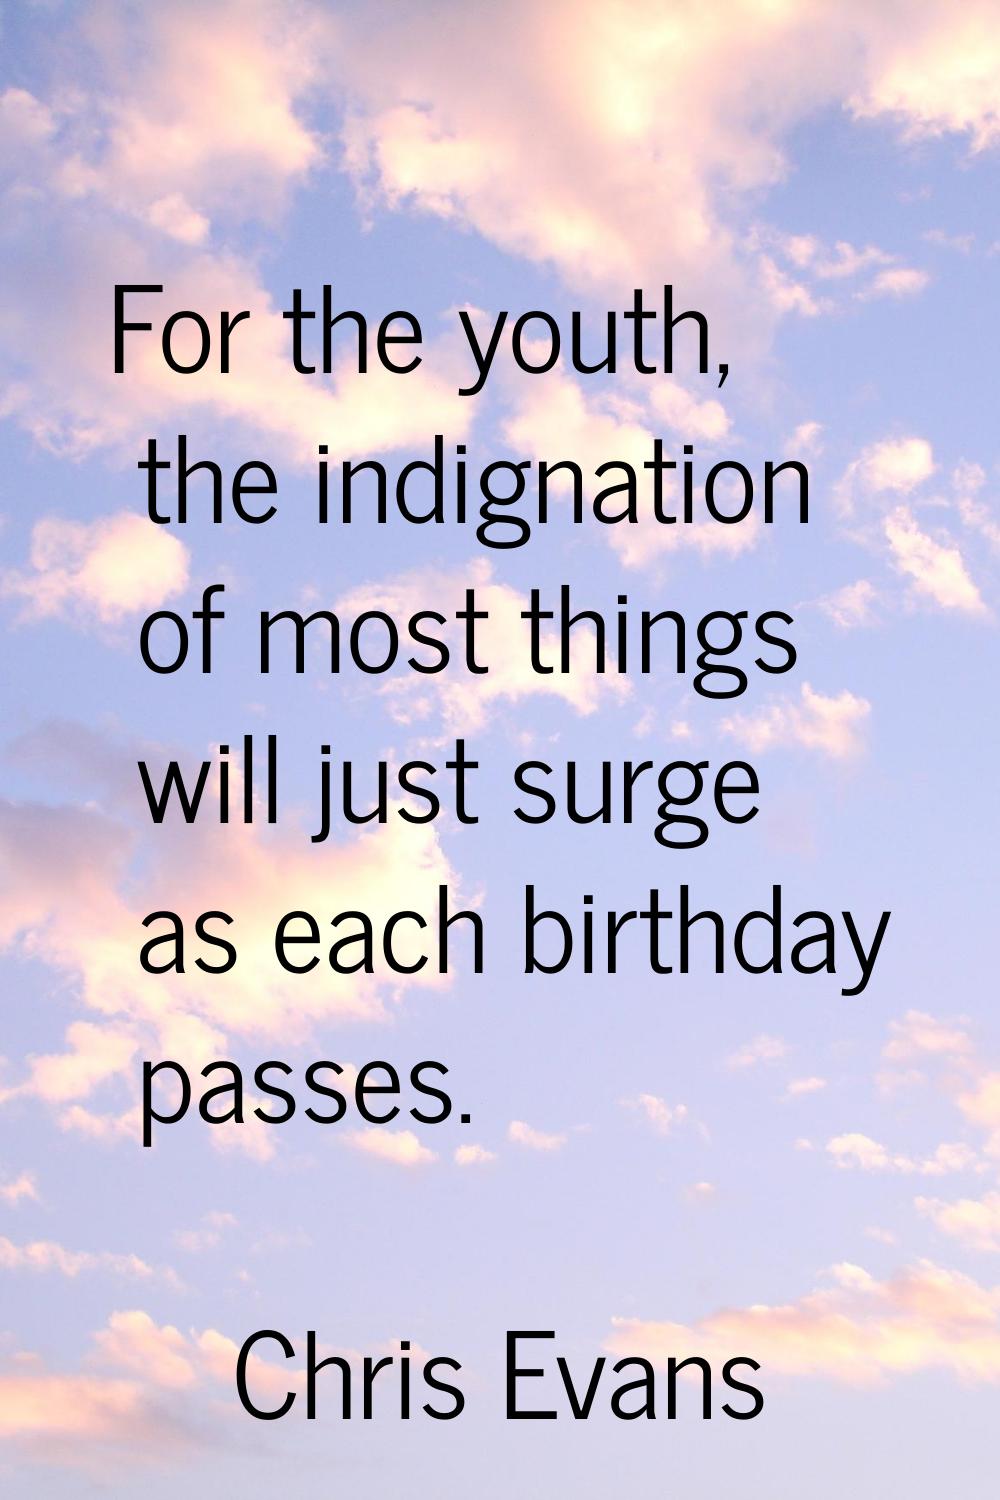 For the youth, the indignation of most things will just surge as each birthday passes.